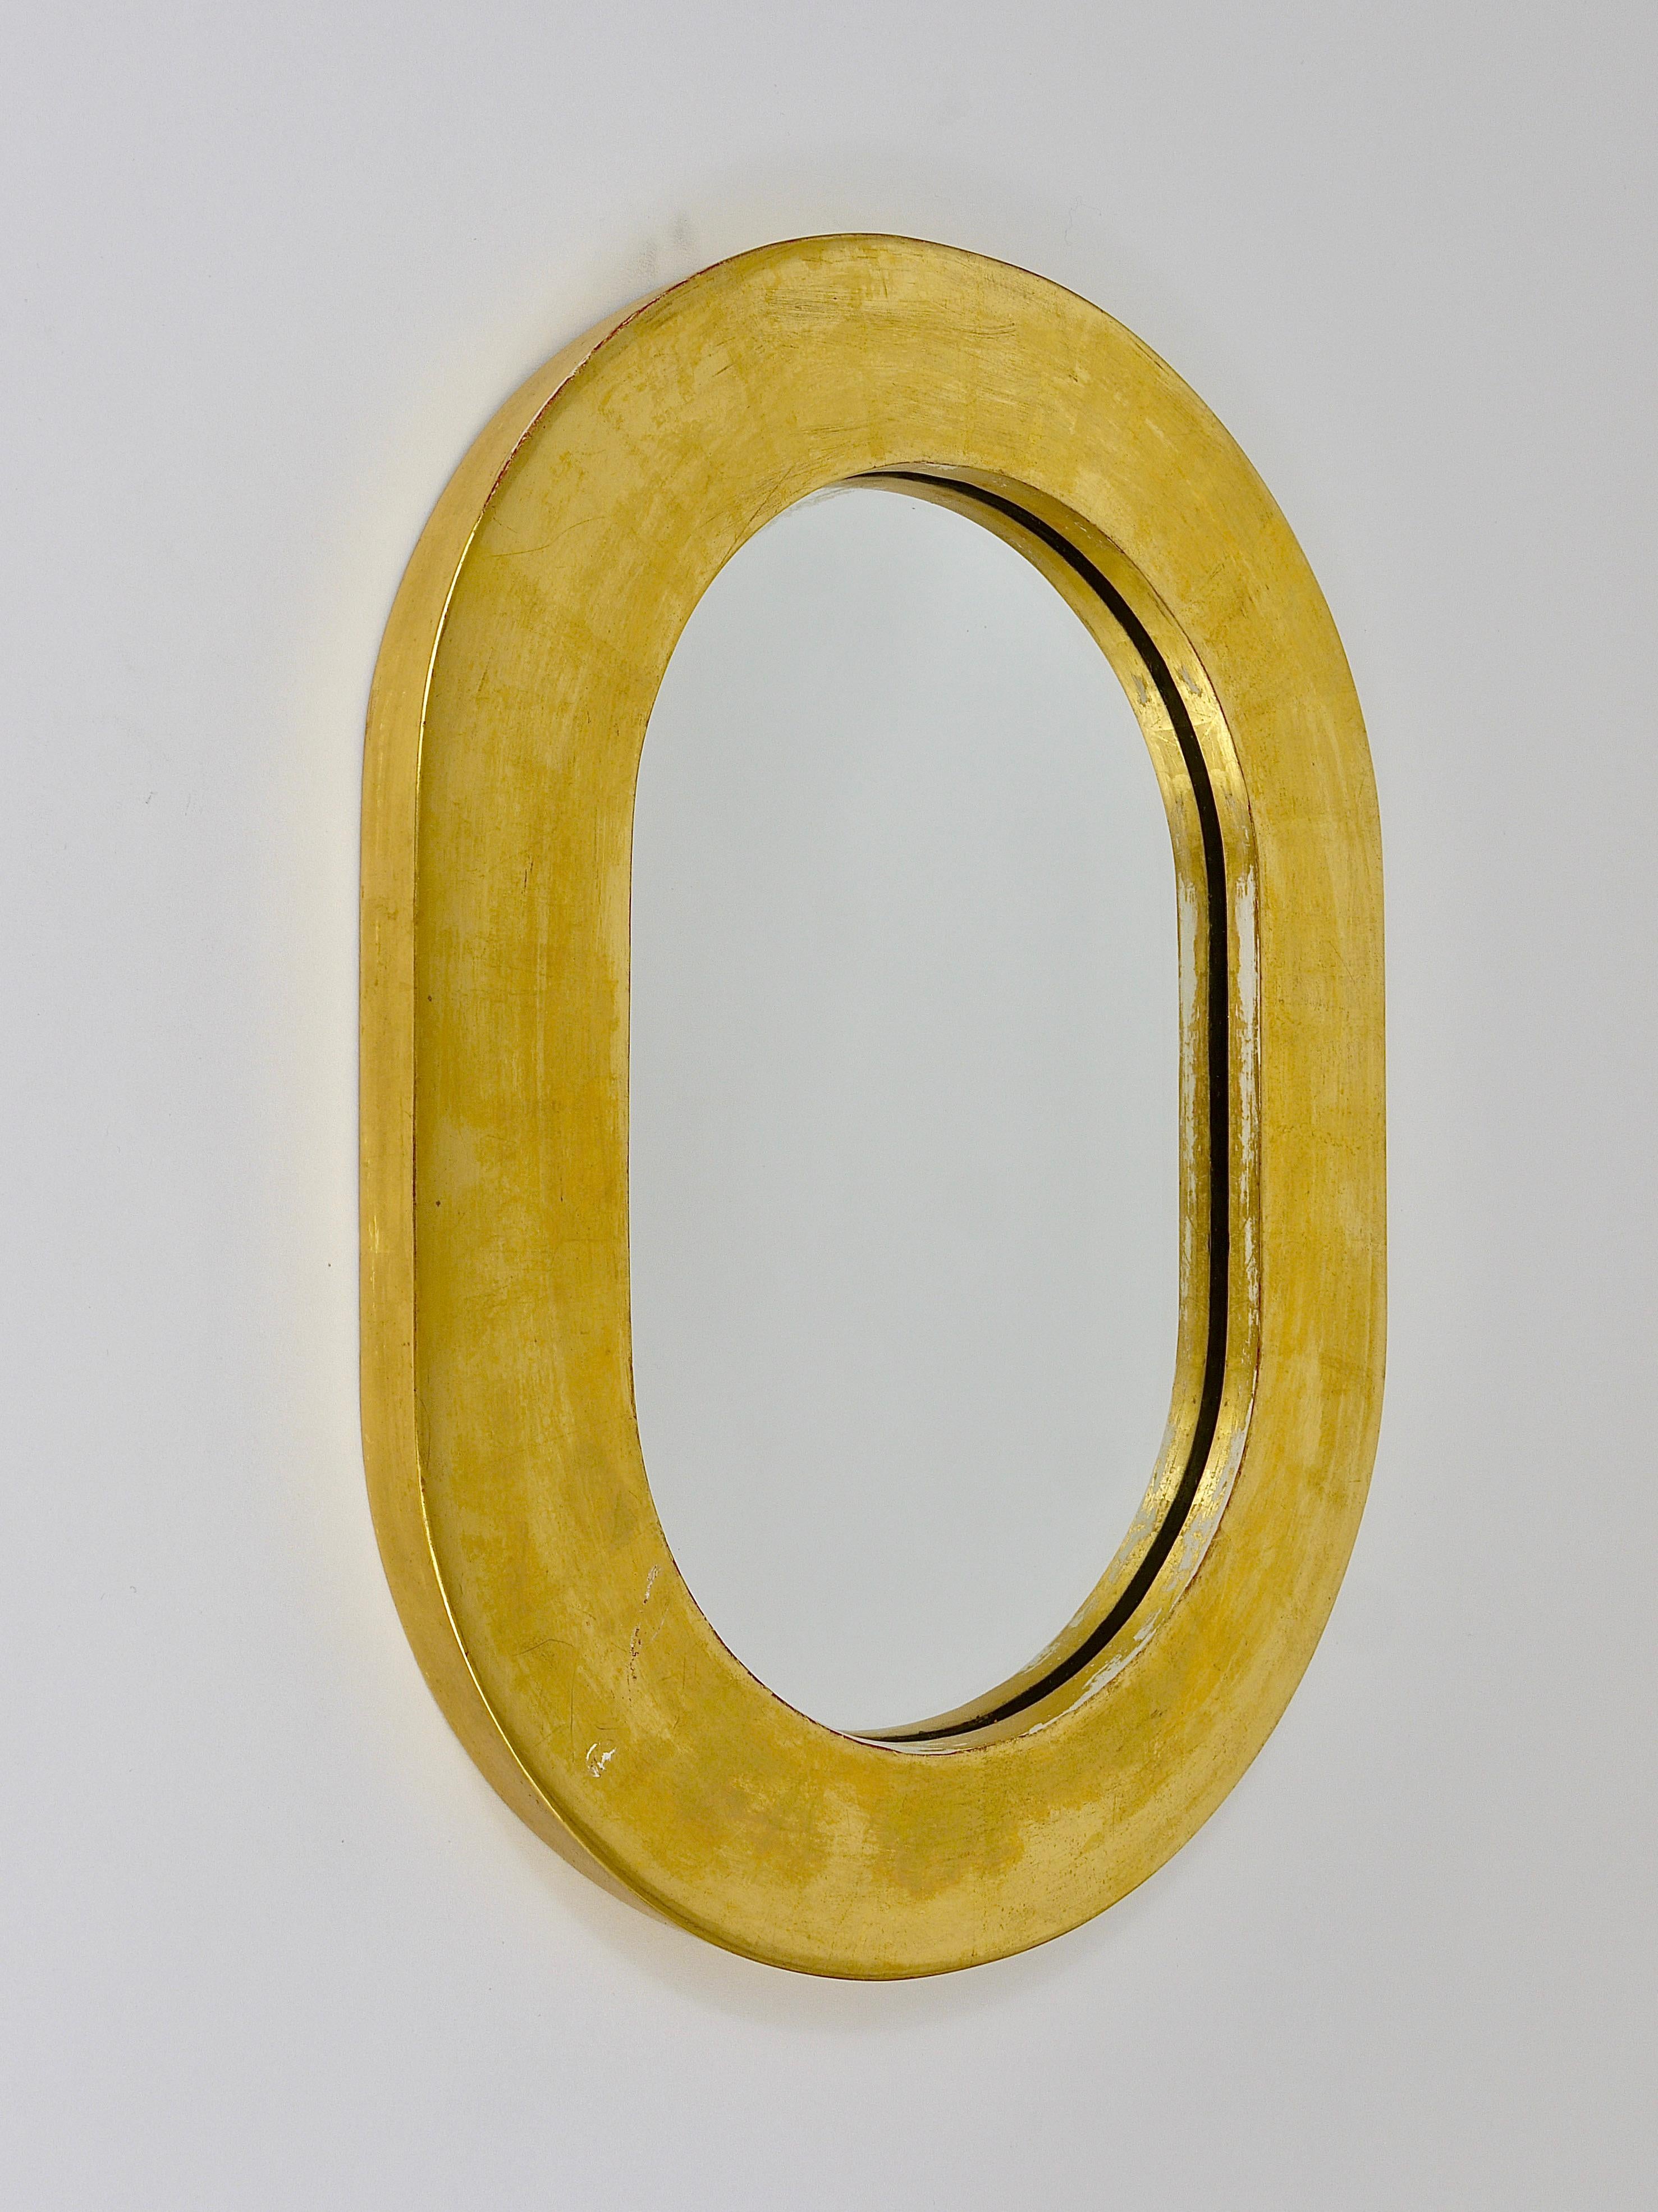 Carl Aubock Gold-Plated Midcentury Wall Mirror, Austria, 1960s For Sale 1